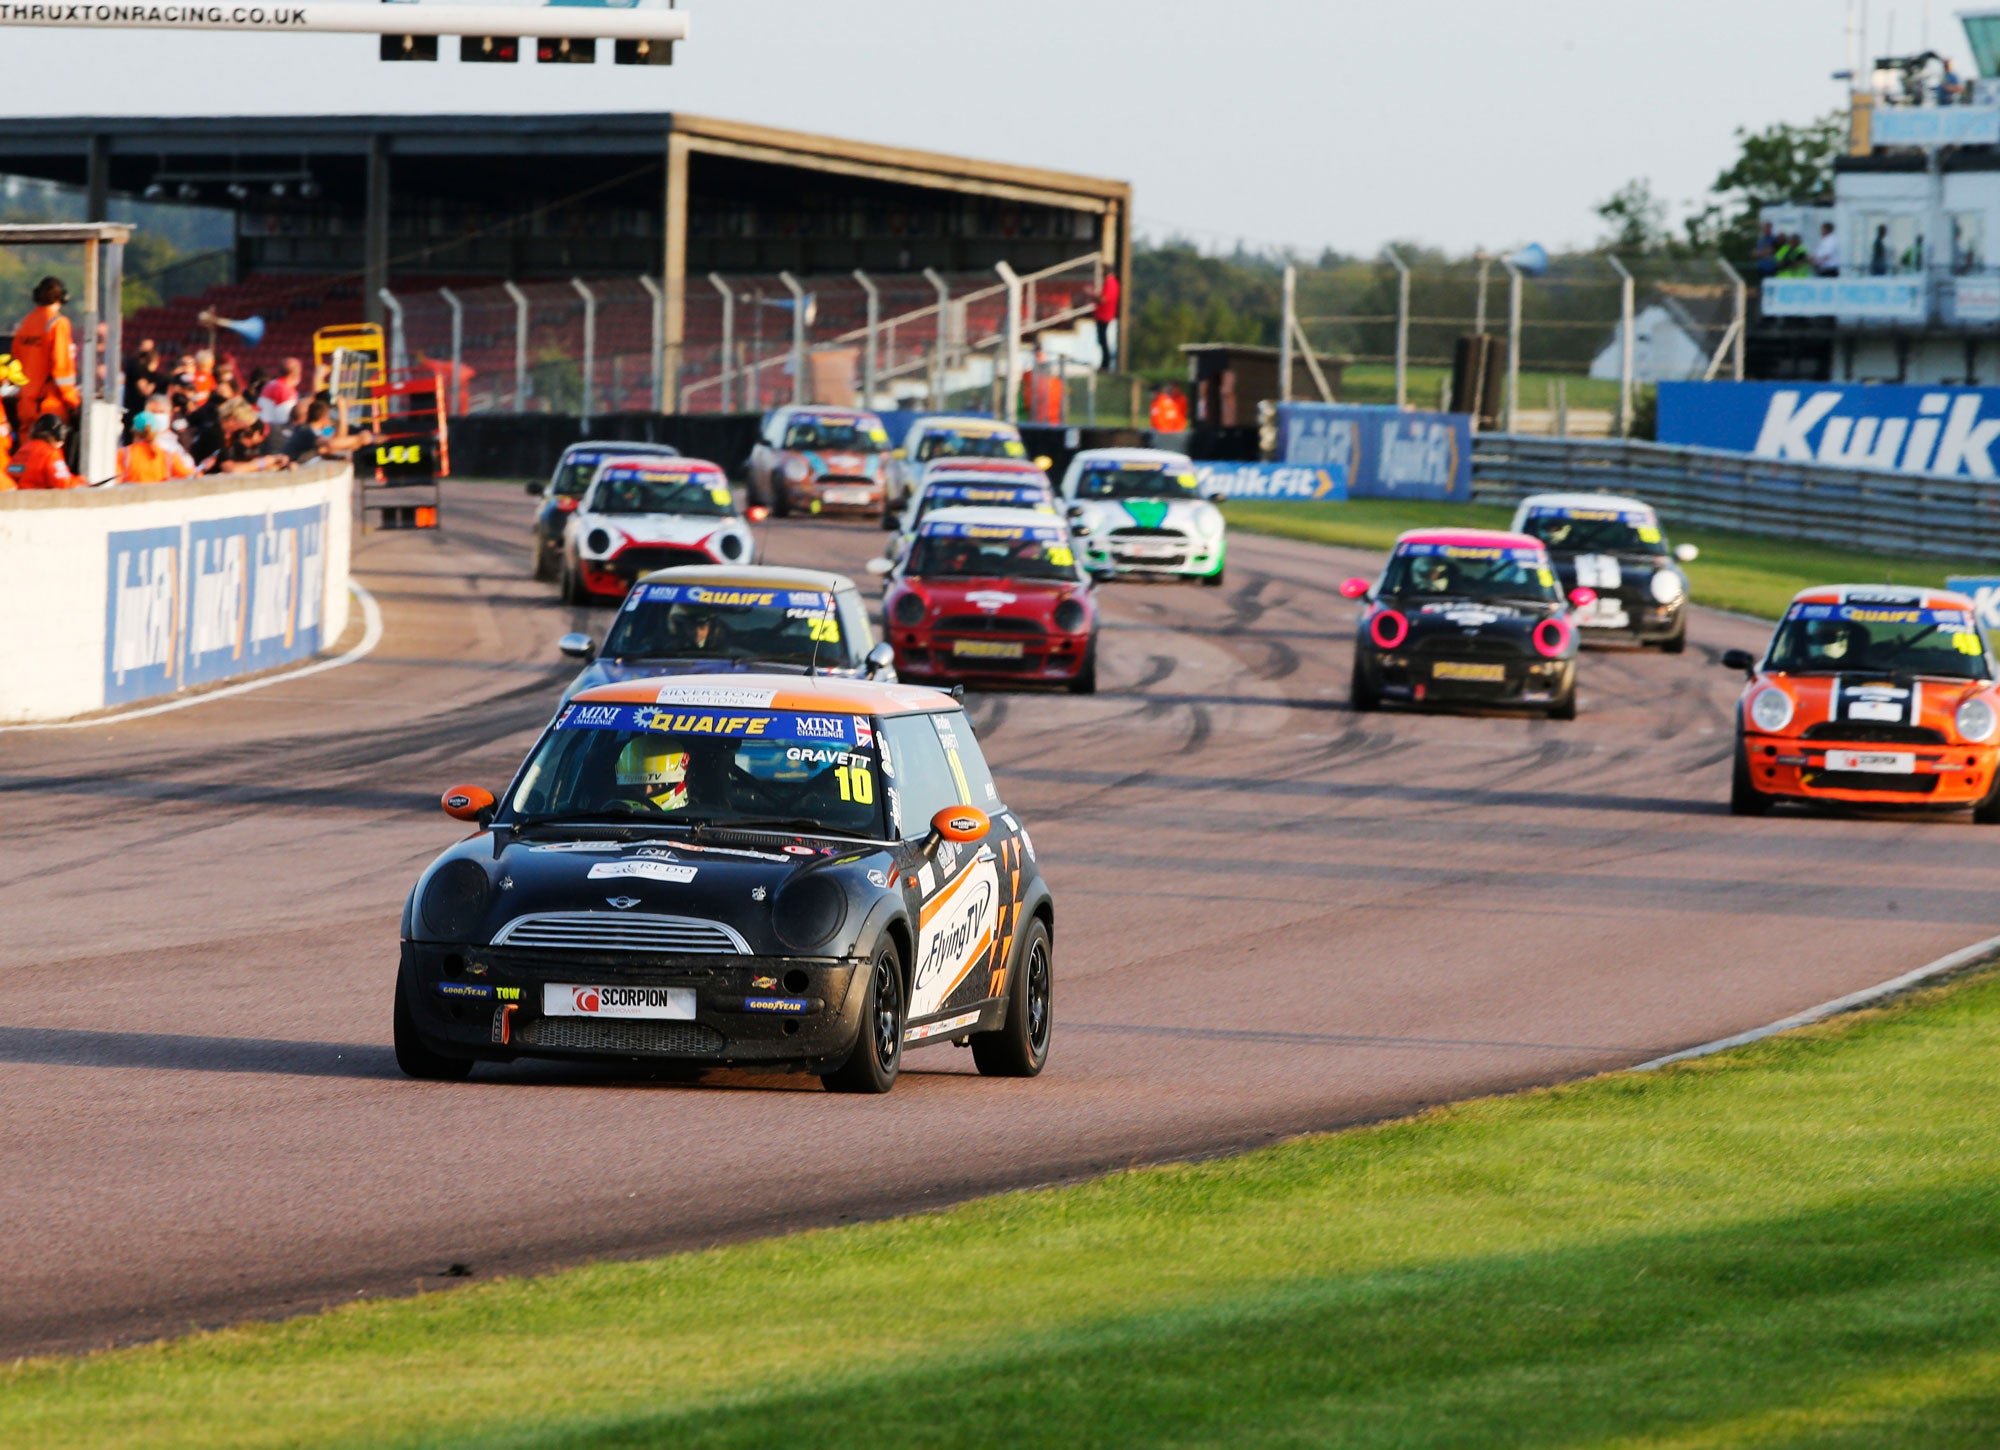 Bradley Gravett son of BTCC British Touring Car Champion Robb Gravett in the Cooper Trophy at Thruxton in 2020 on Main Straight with Graves Motorsport Mini Challenge JCW Cooper Racing Driver LIQUI MOLY LM Performance Omologato Watches